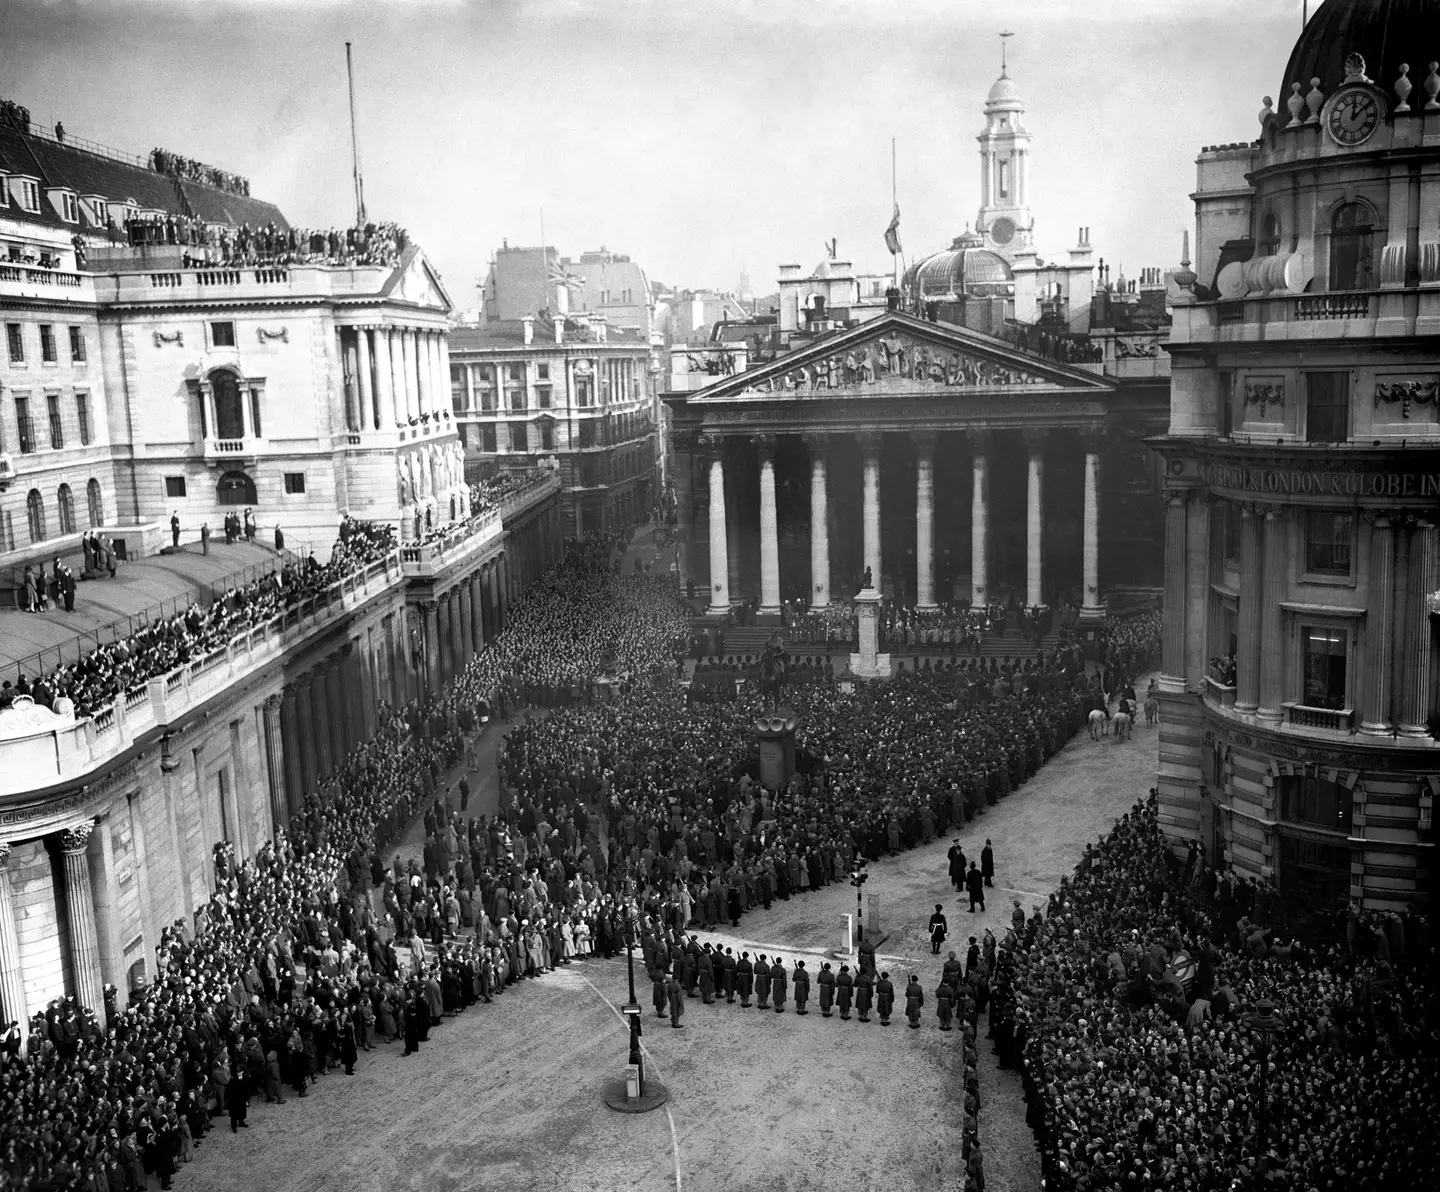 Large crowds outside the Royal Exchange for the accession of Queen Elizabeth II.